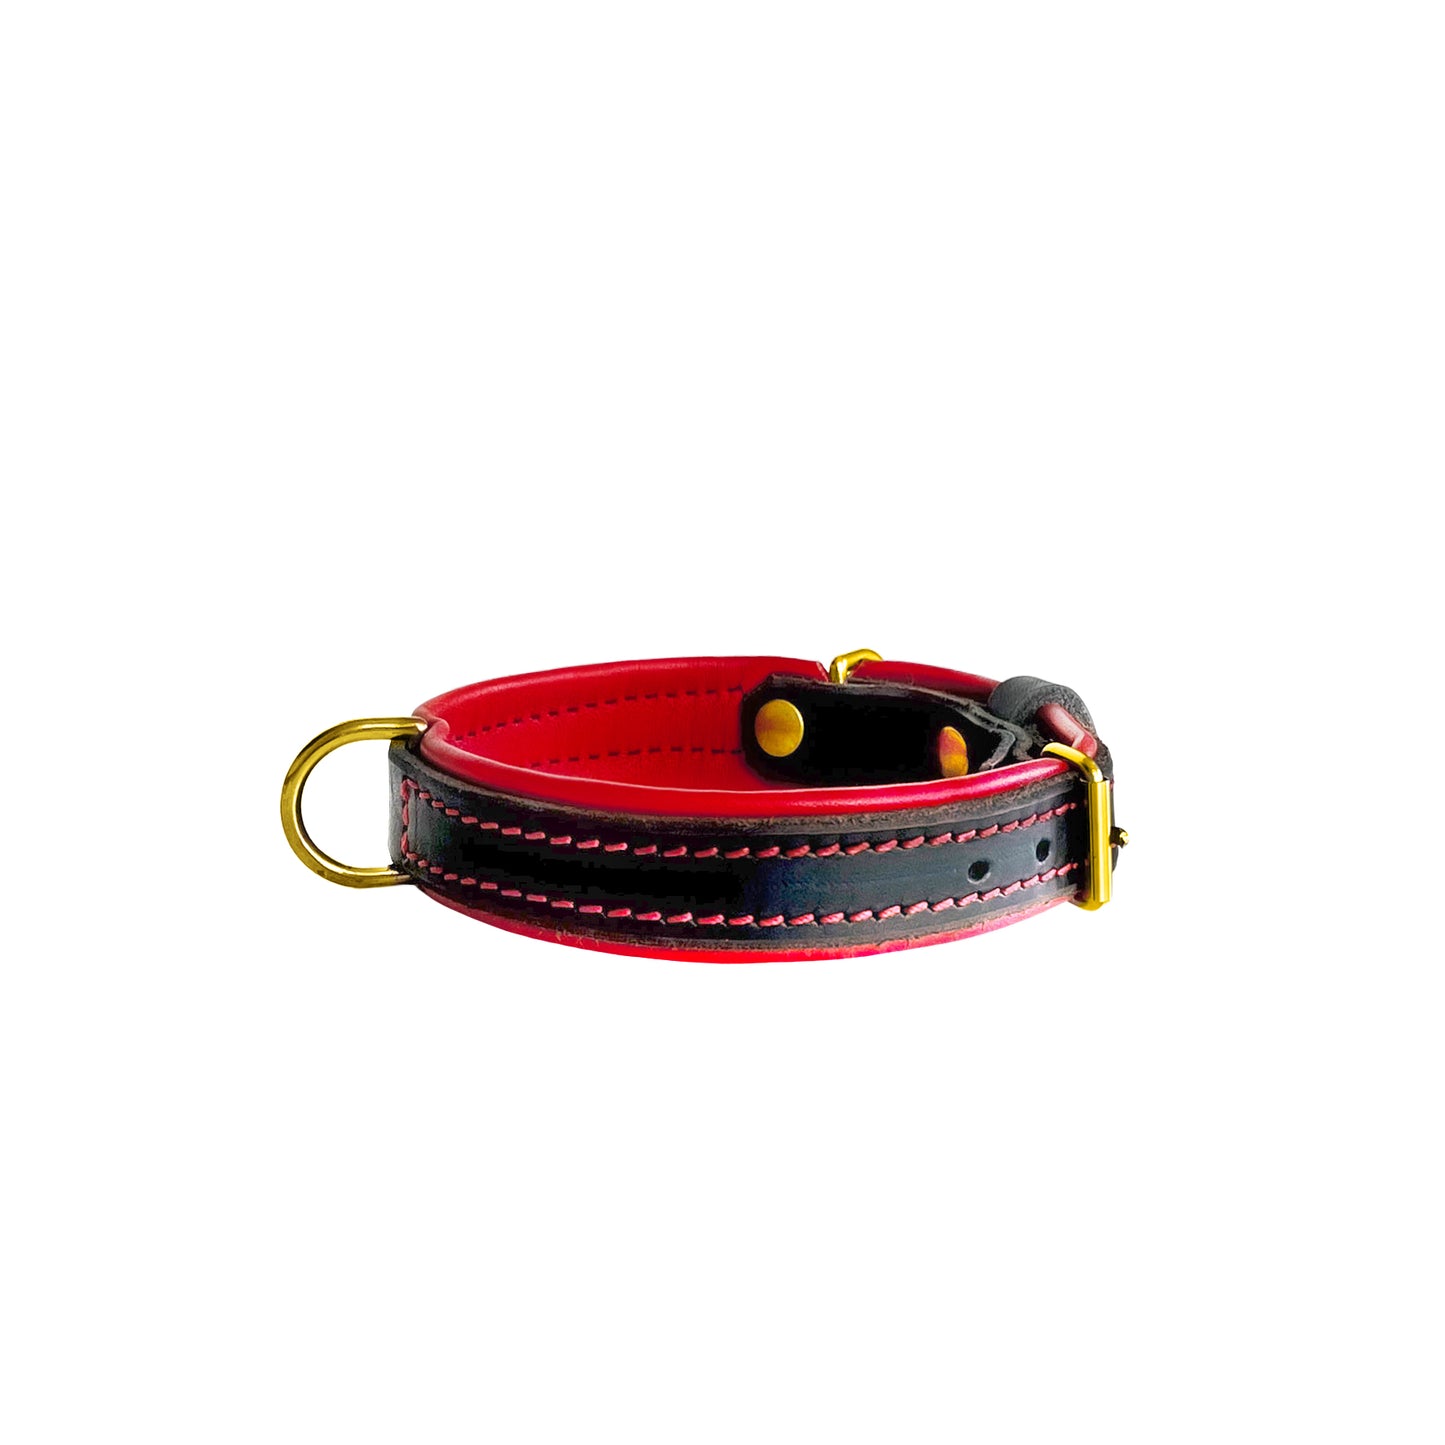 Rouge Leather Collar, Leash, and Accessory Set